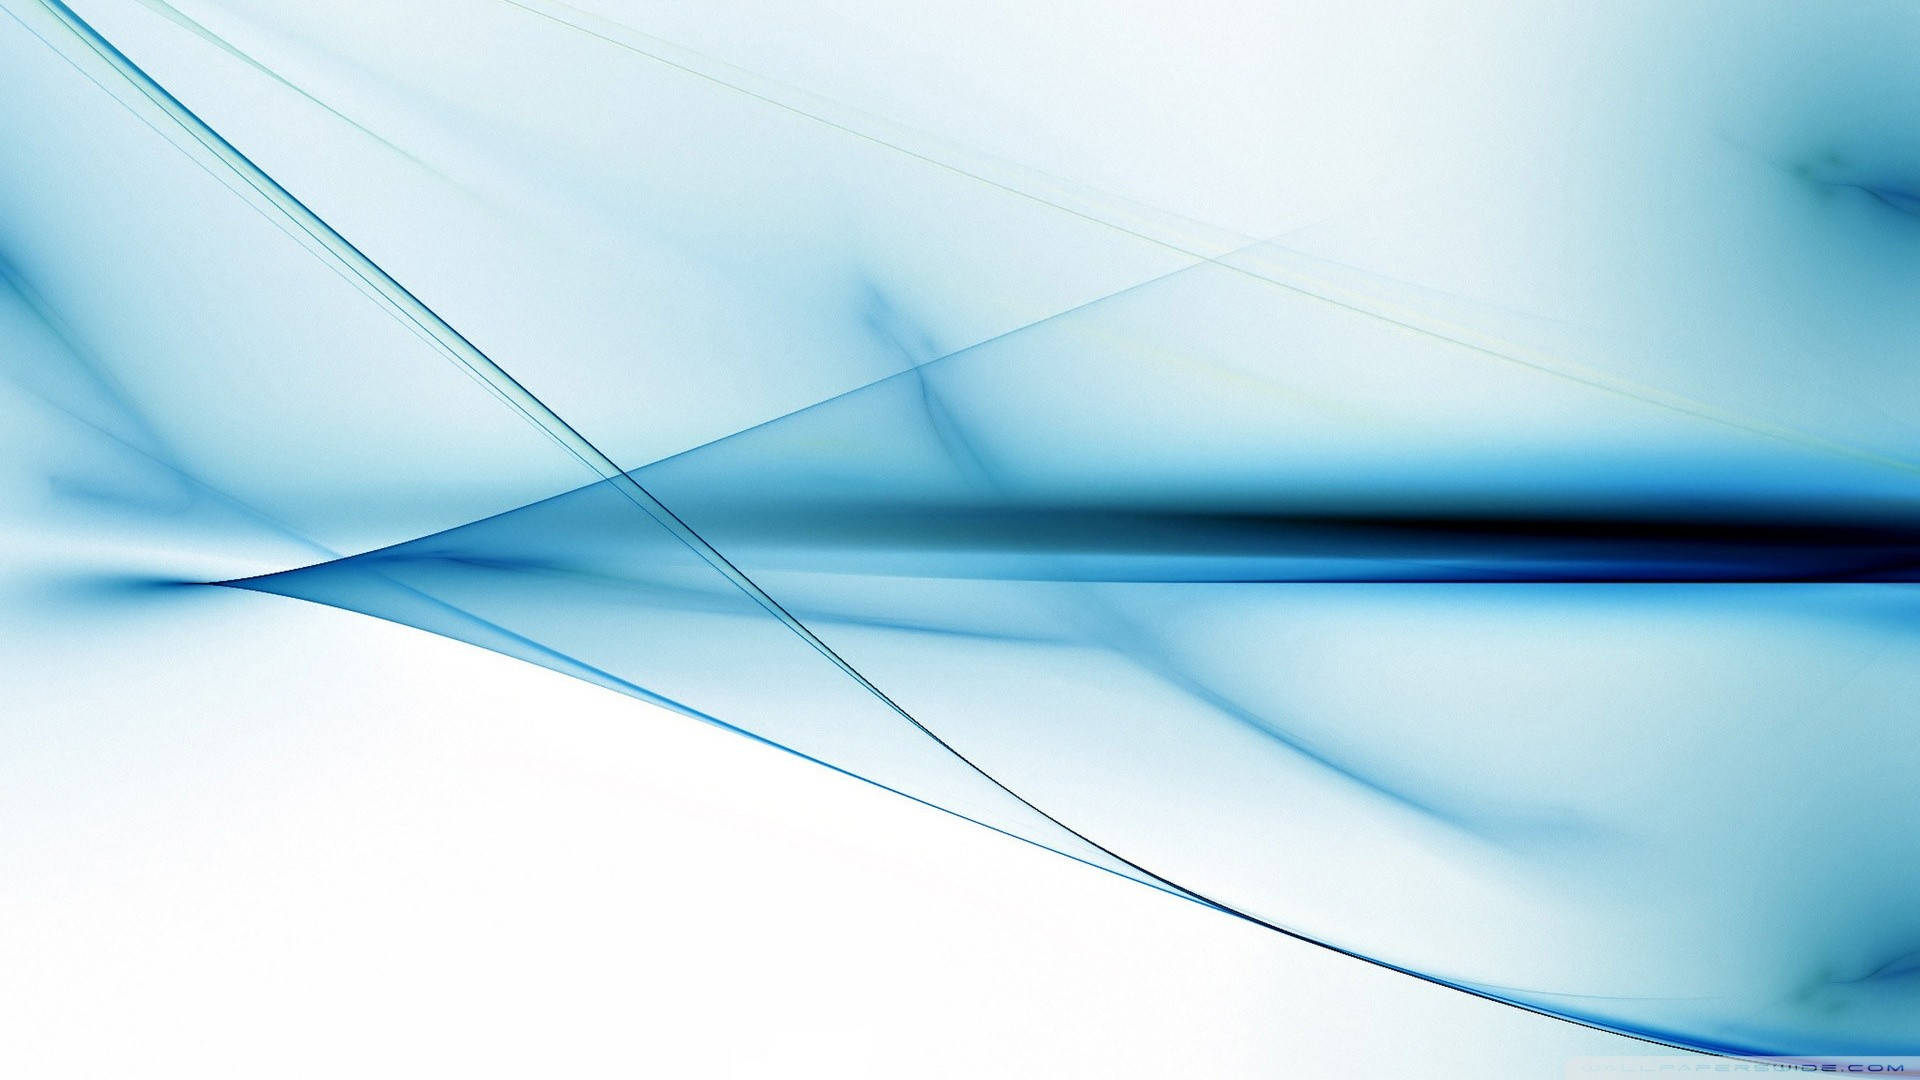 Abstract Blue And White Hd